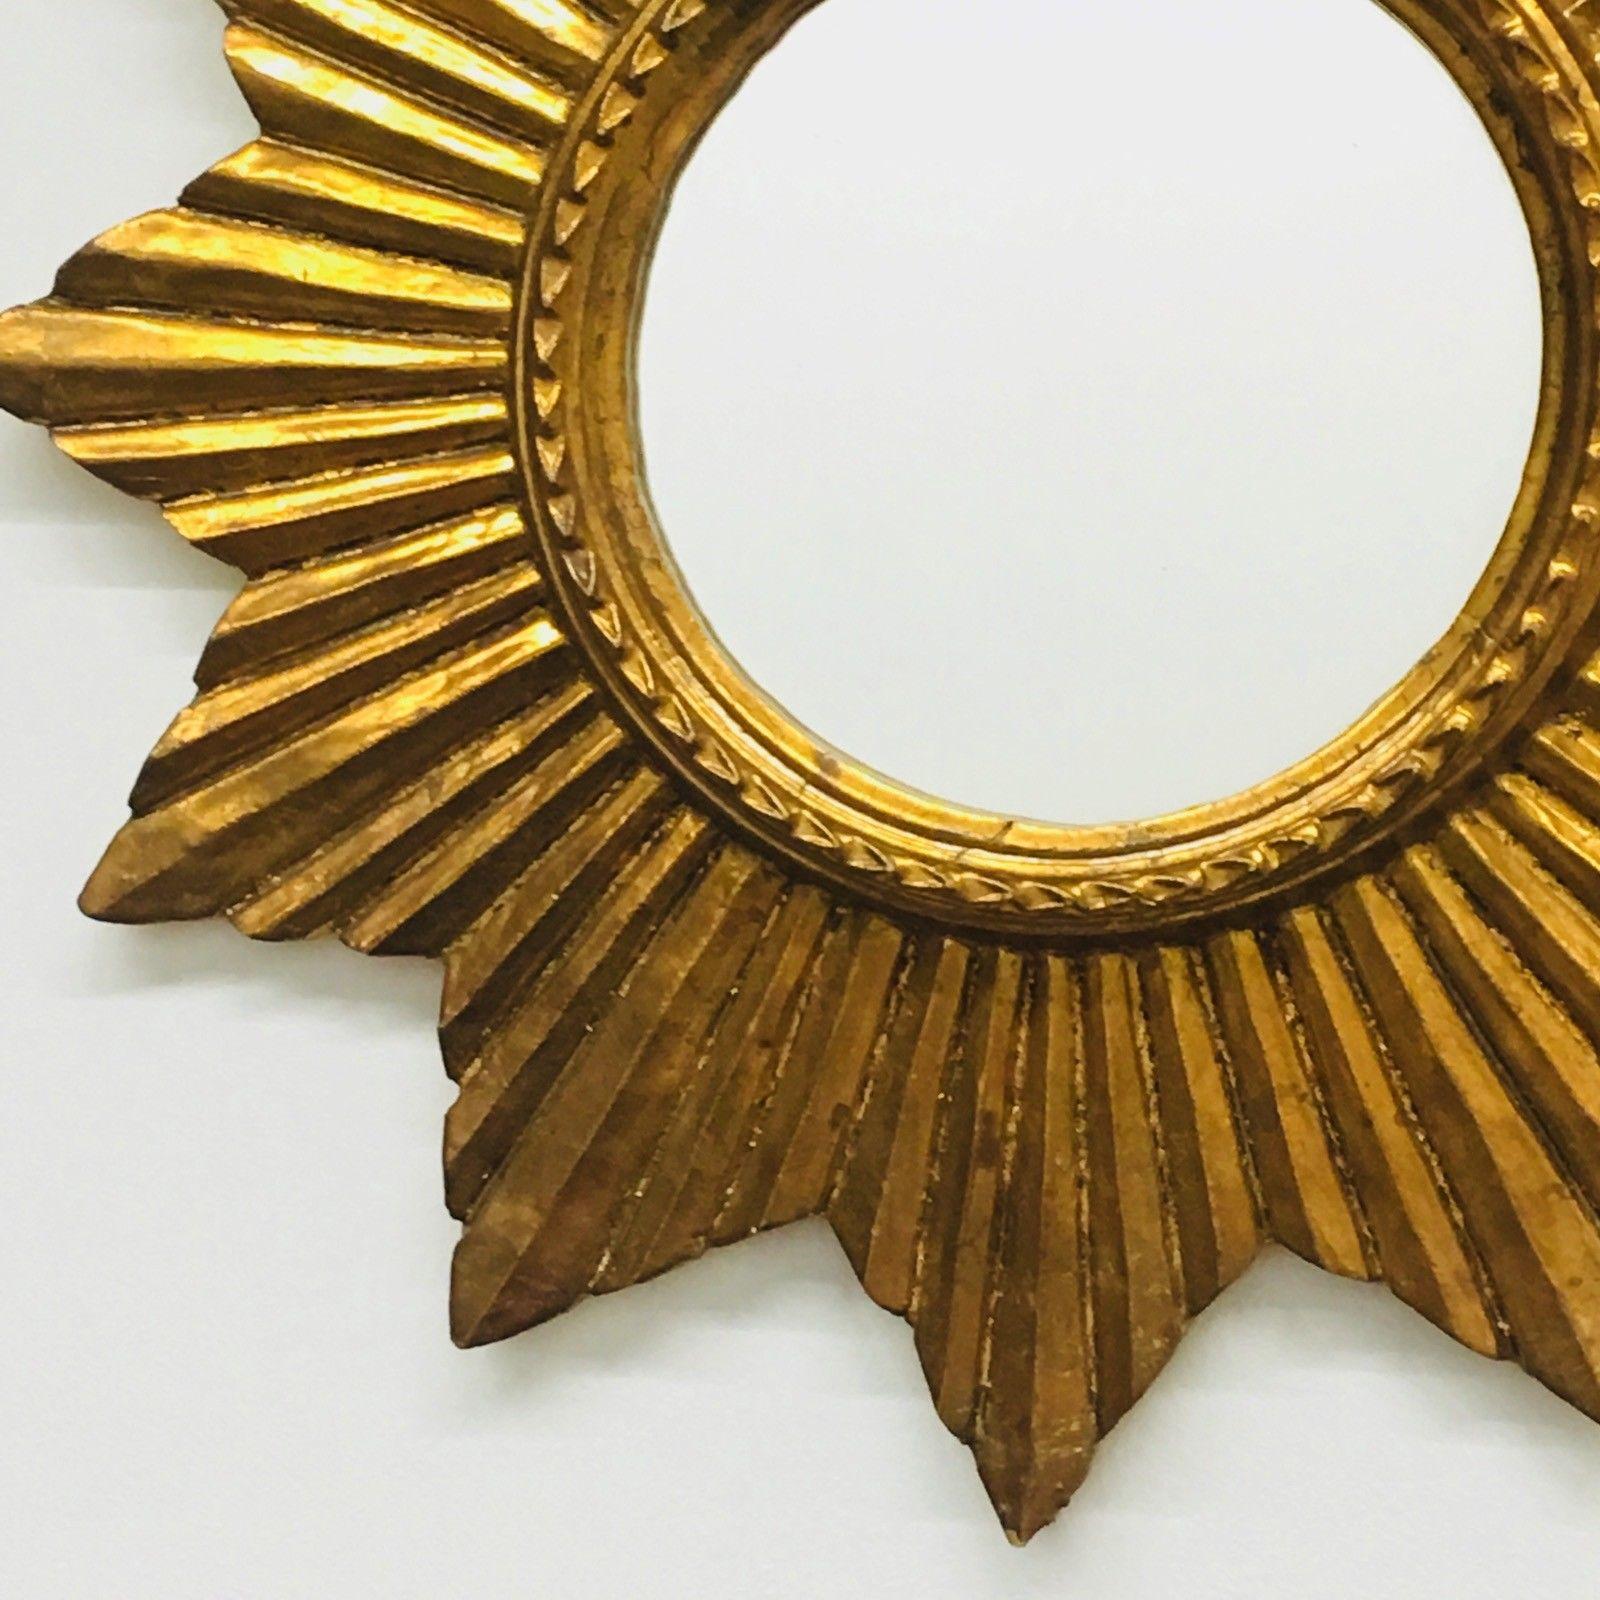 A gorgeous starburst mirror. Made of gilded wood and composition. With minor signs of wear as expected with age and use.
Obviously this item is not new, so please check all photos before purchase. It measures approximate 19